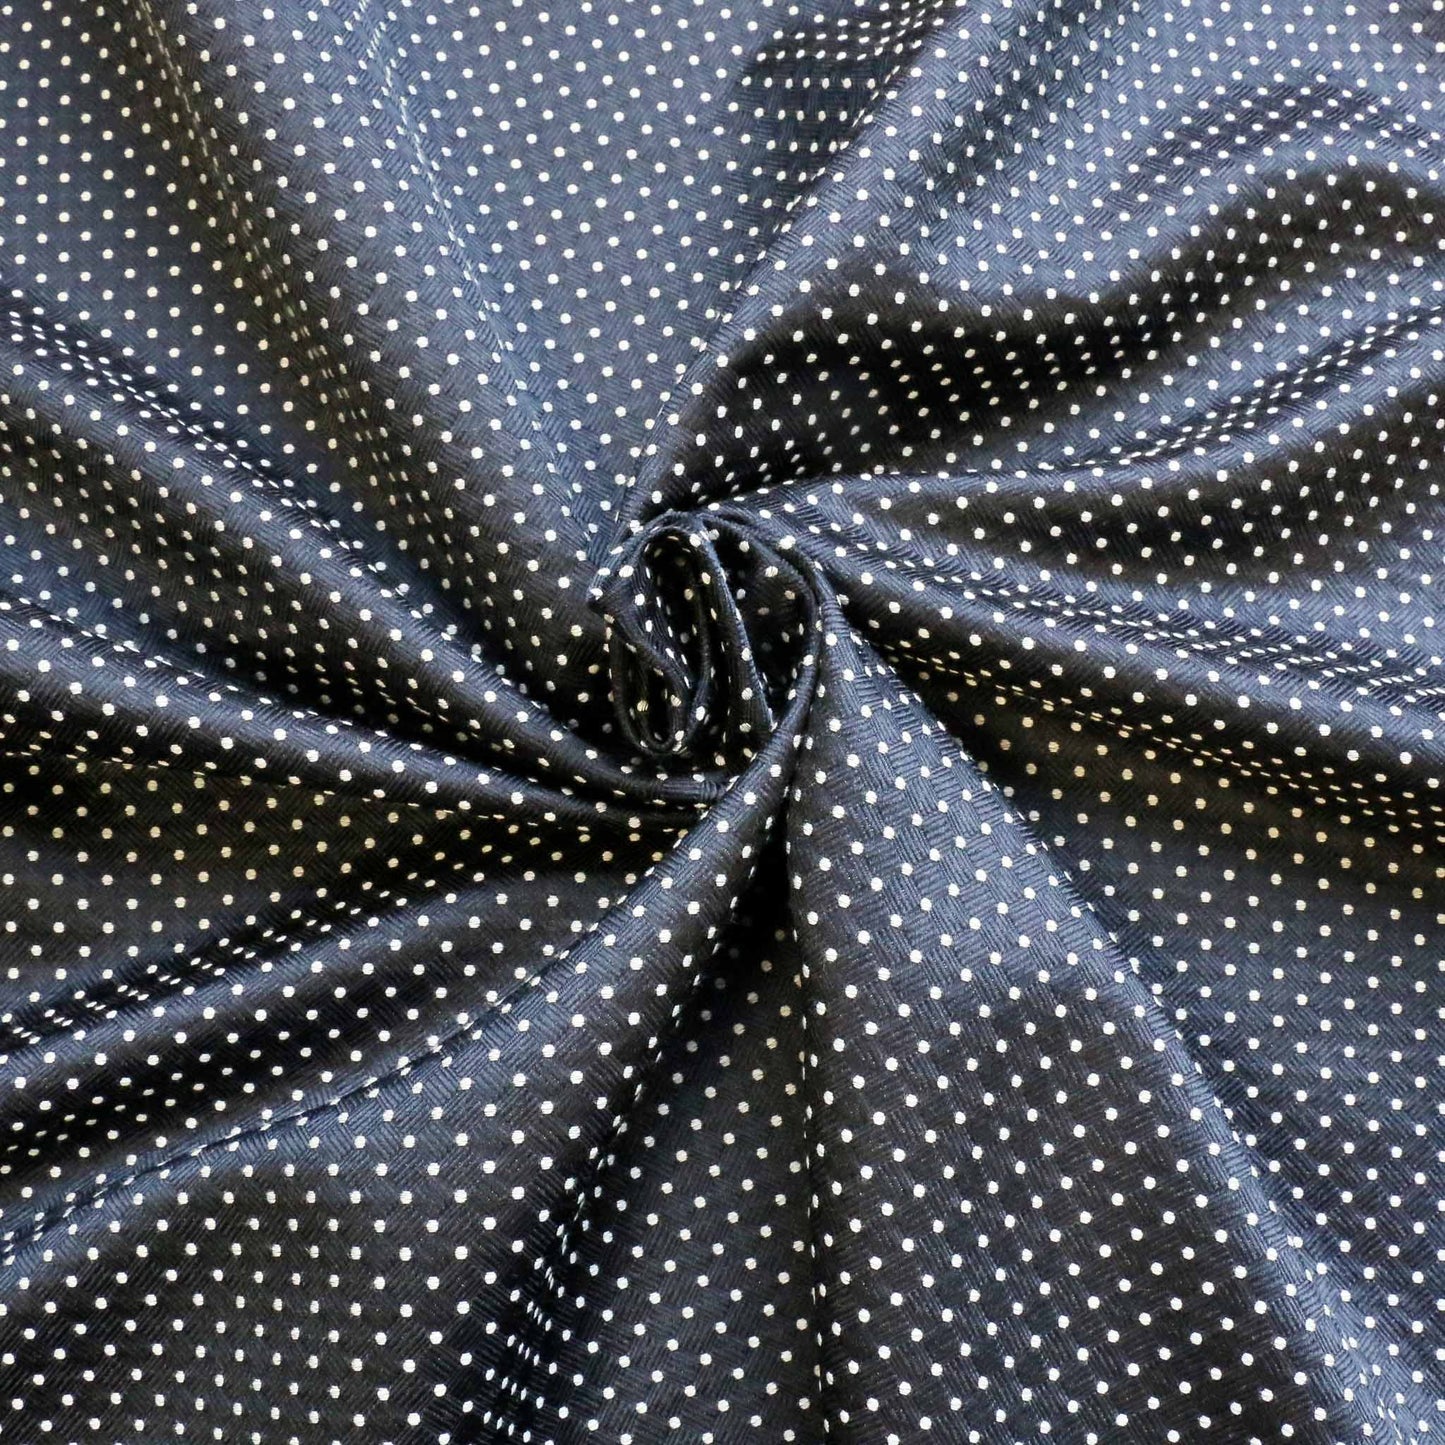 jacquard silk tie dot waistcoat fabric in navy blue and white